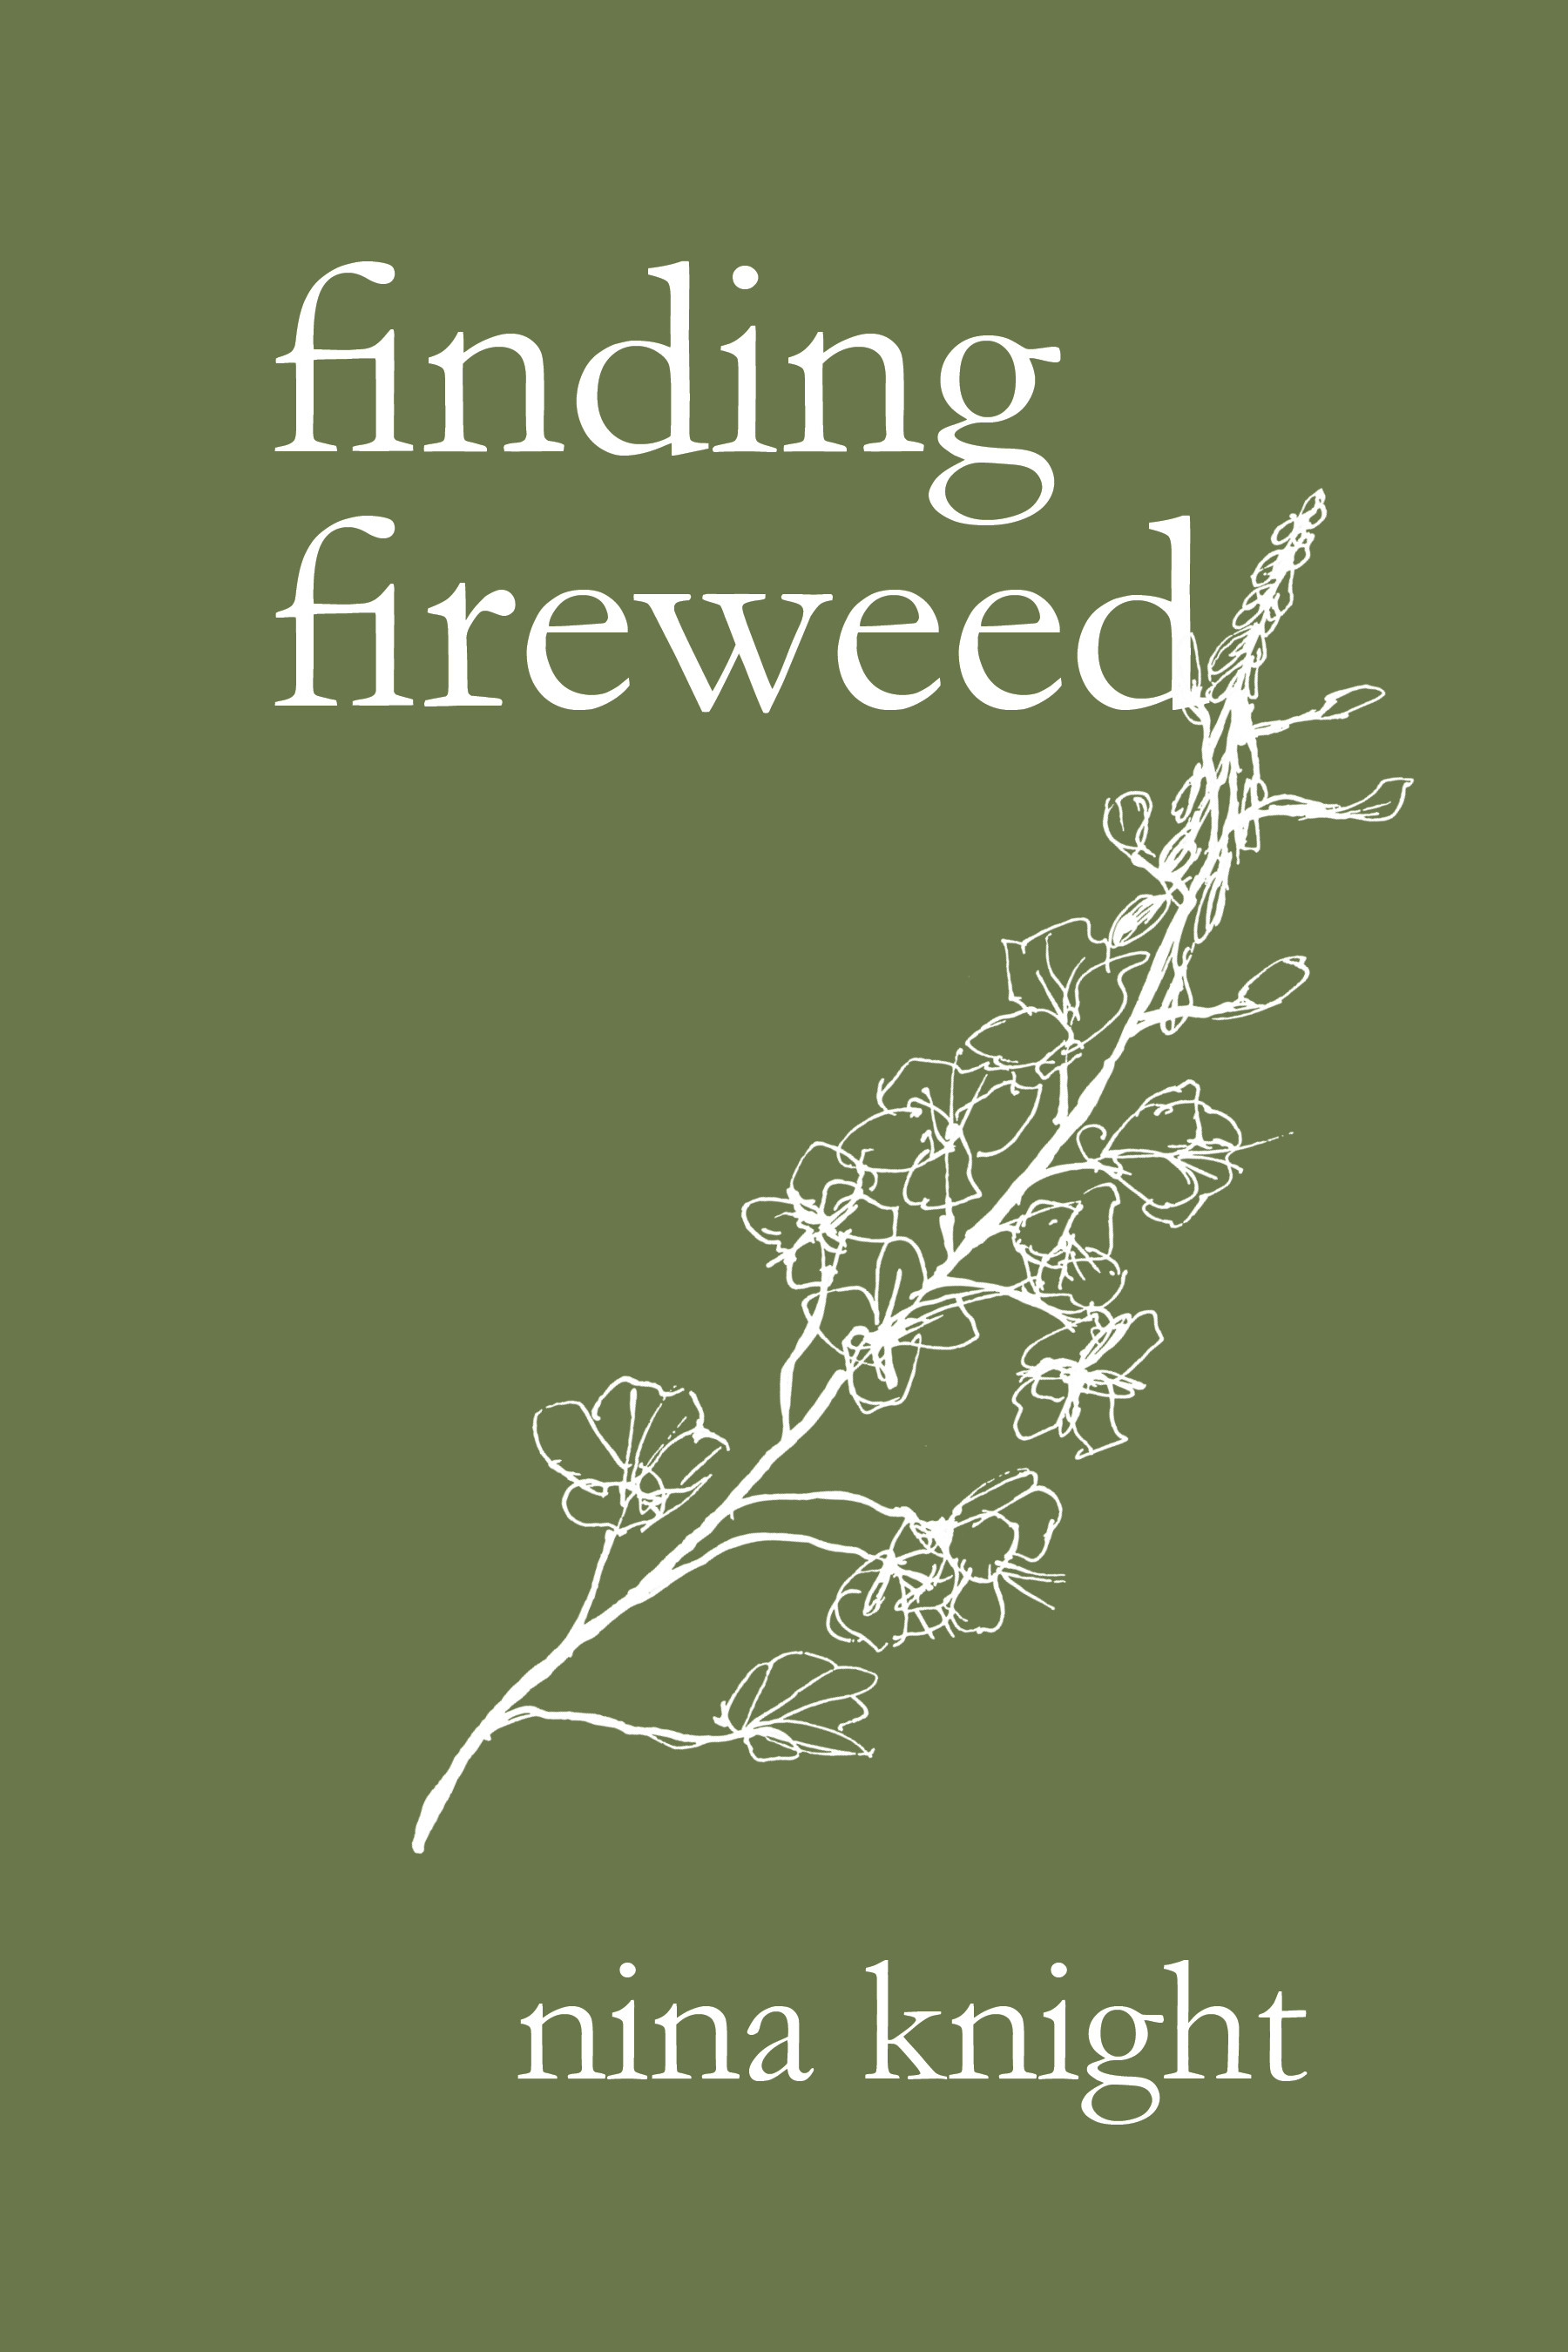 finding fireweed by nina knight